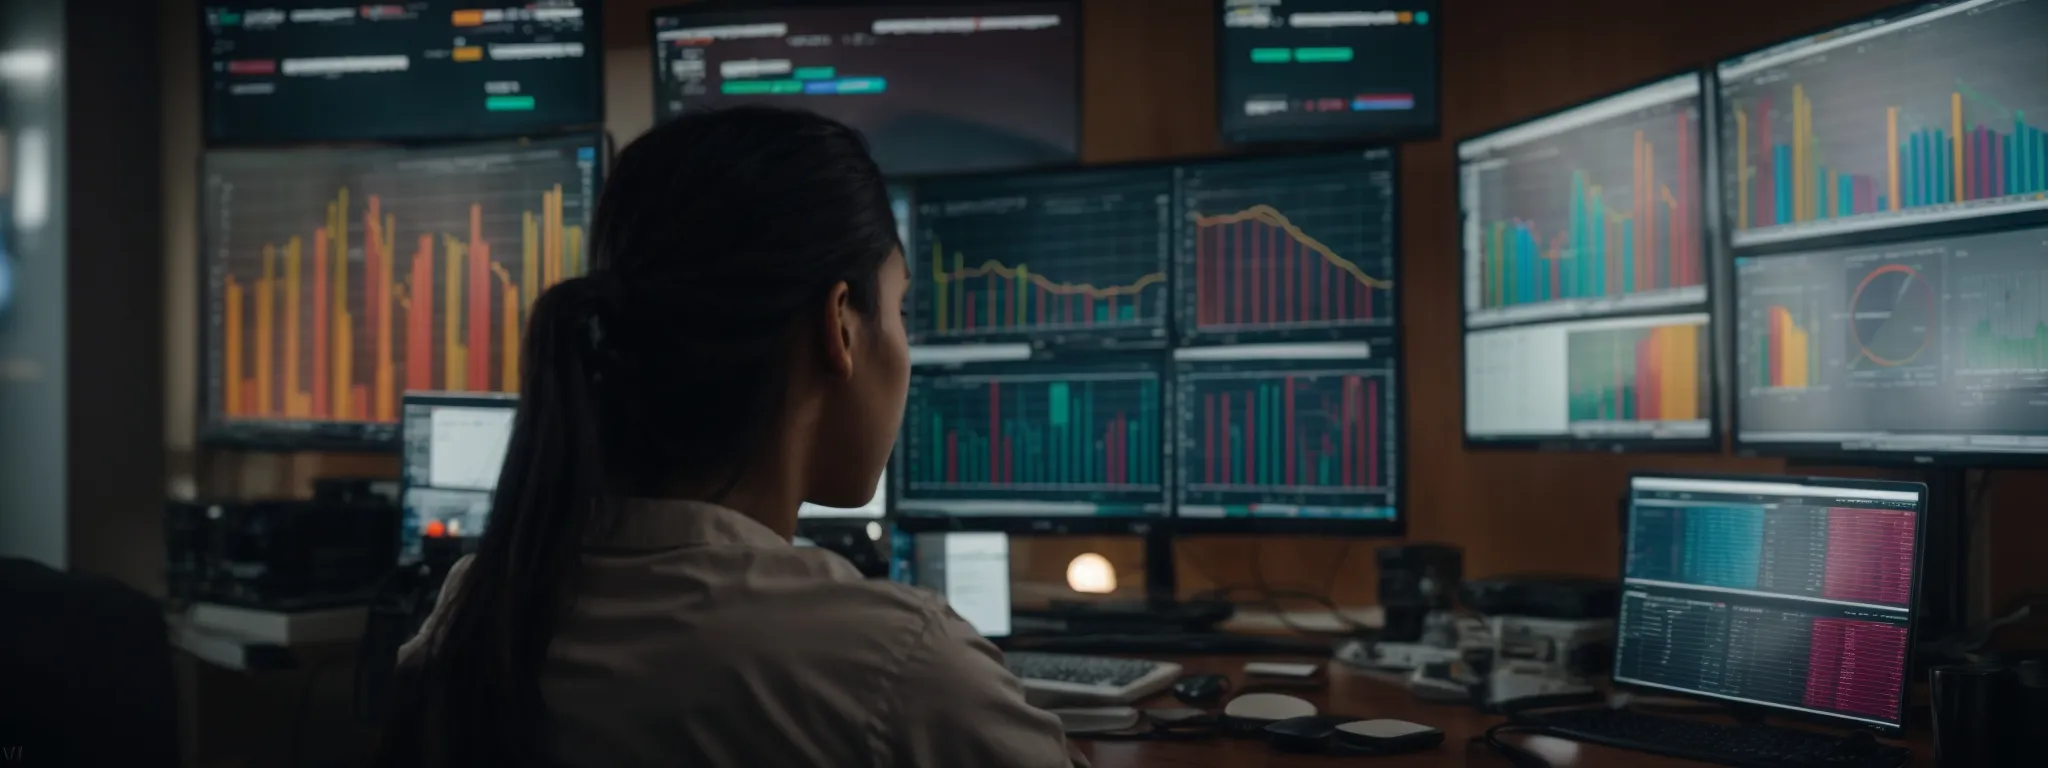 a person sits in front of dual monitors displaying colorful analytics dashboards and seo performance charts.